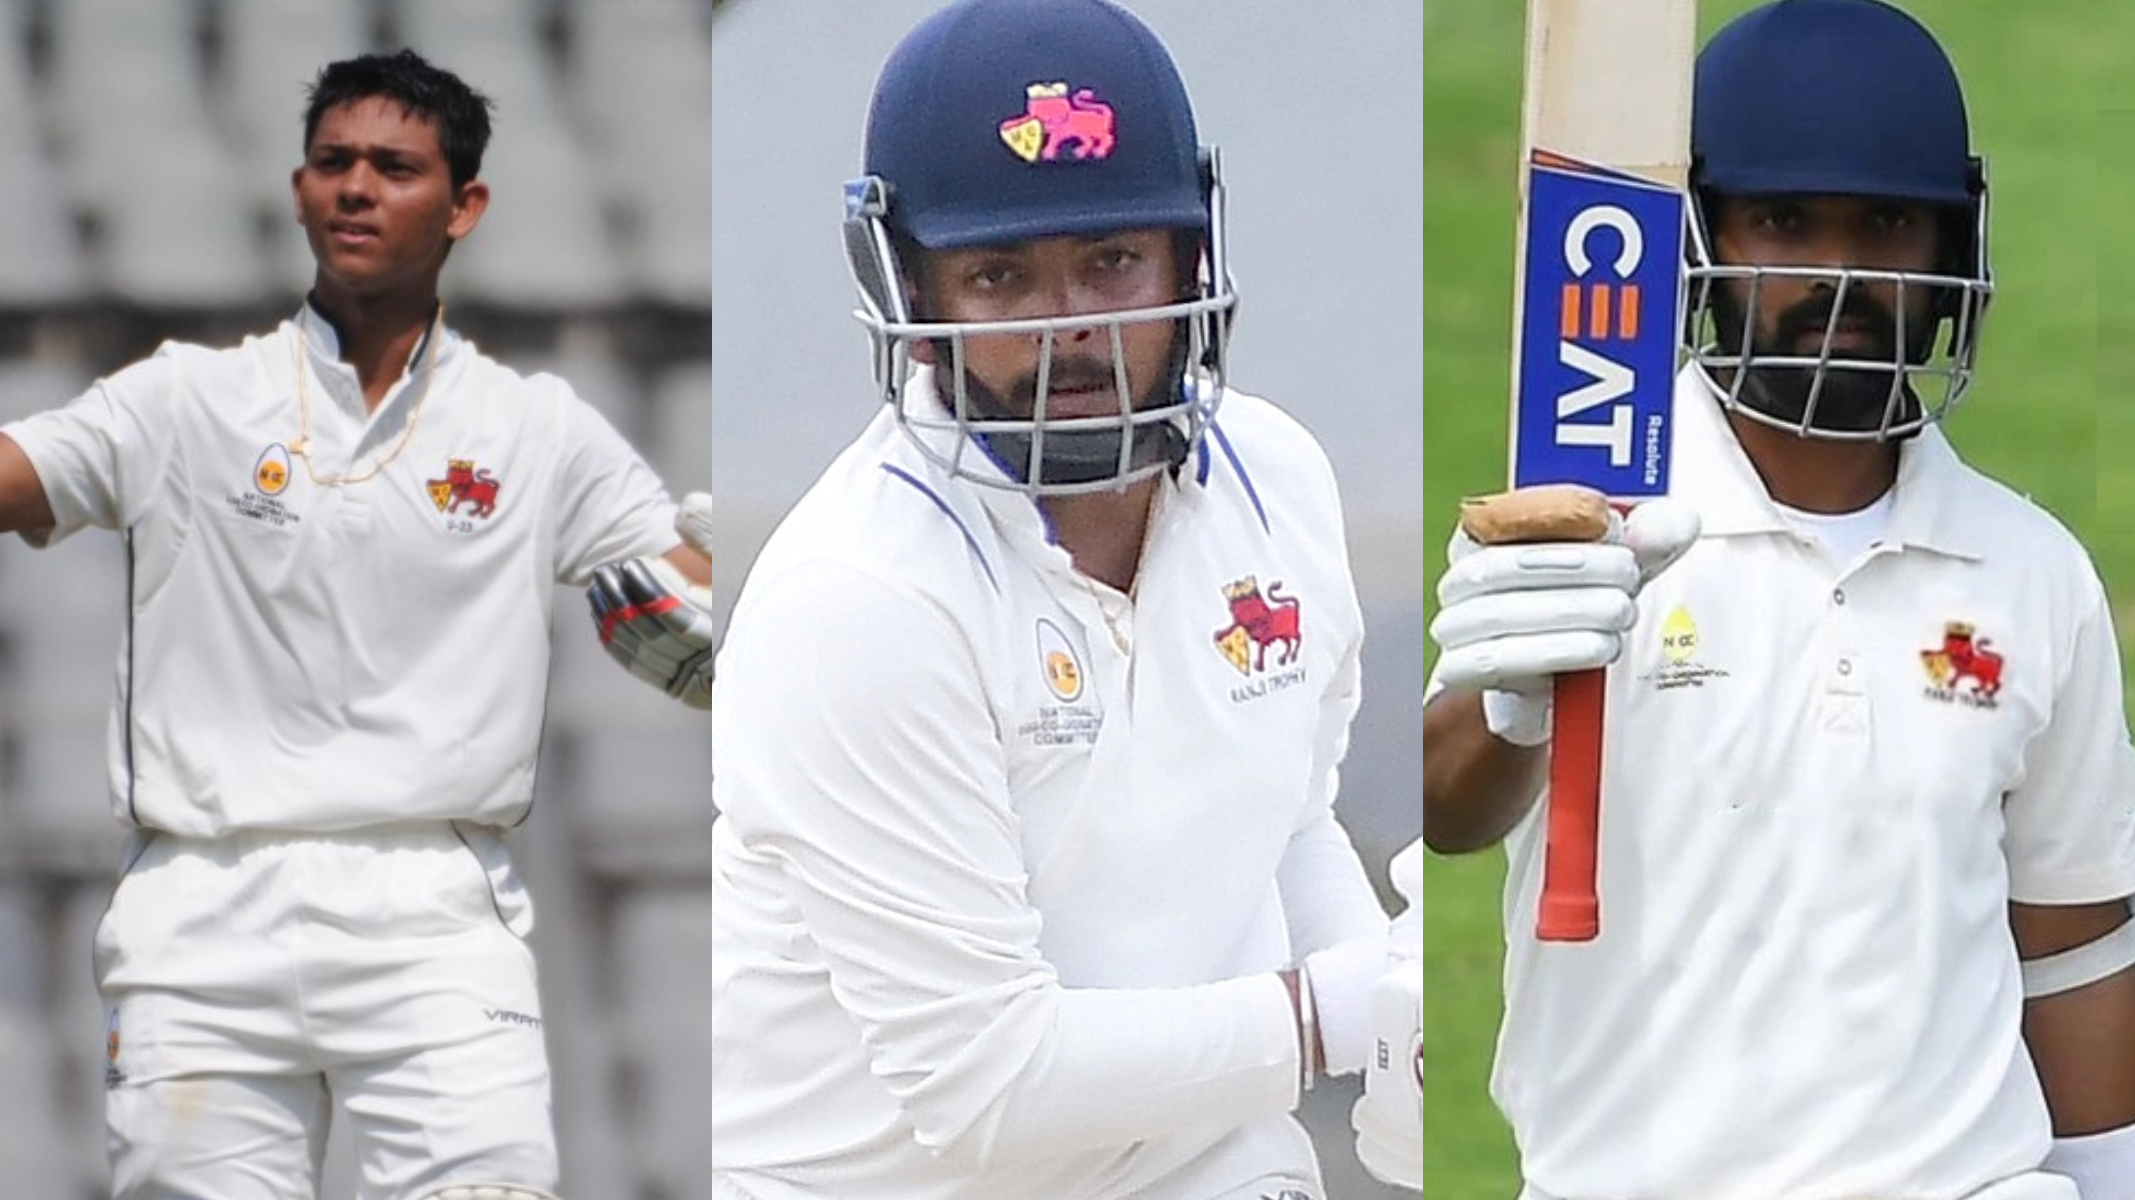 Jaiswal and Rahane made double tons, while Shaw made a century for WZ against NEZ | Twitter